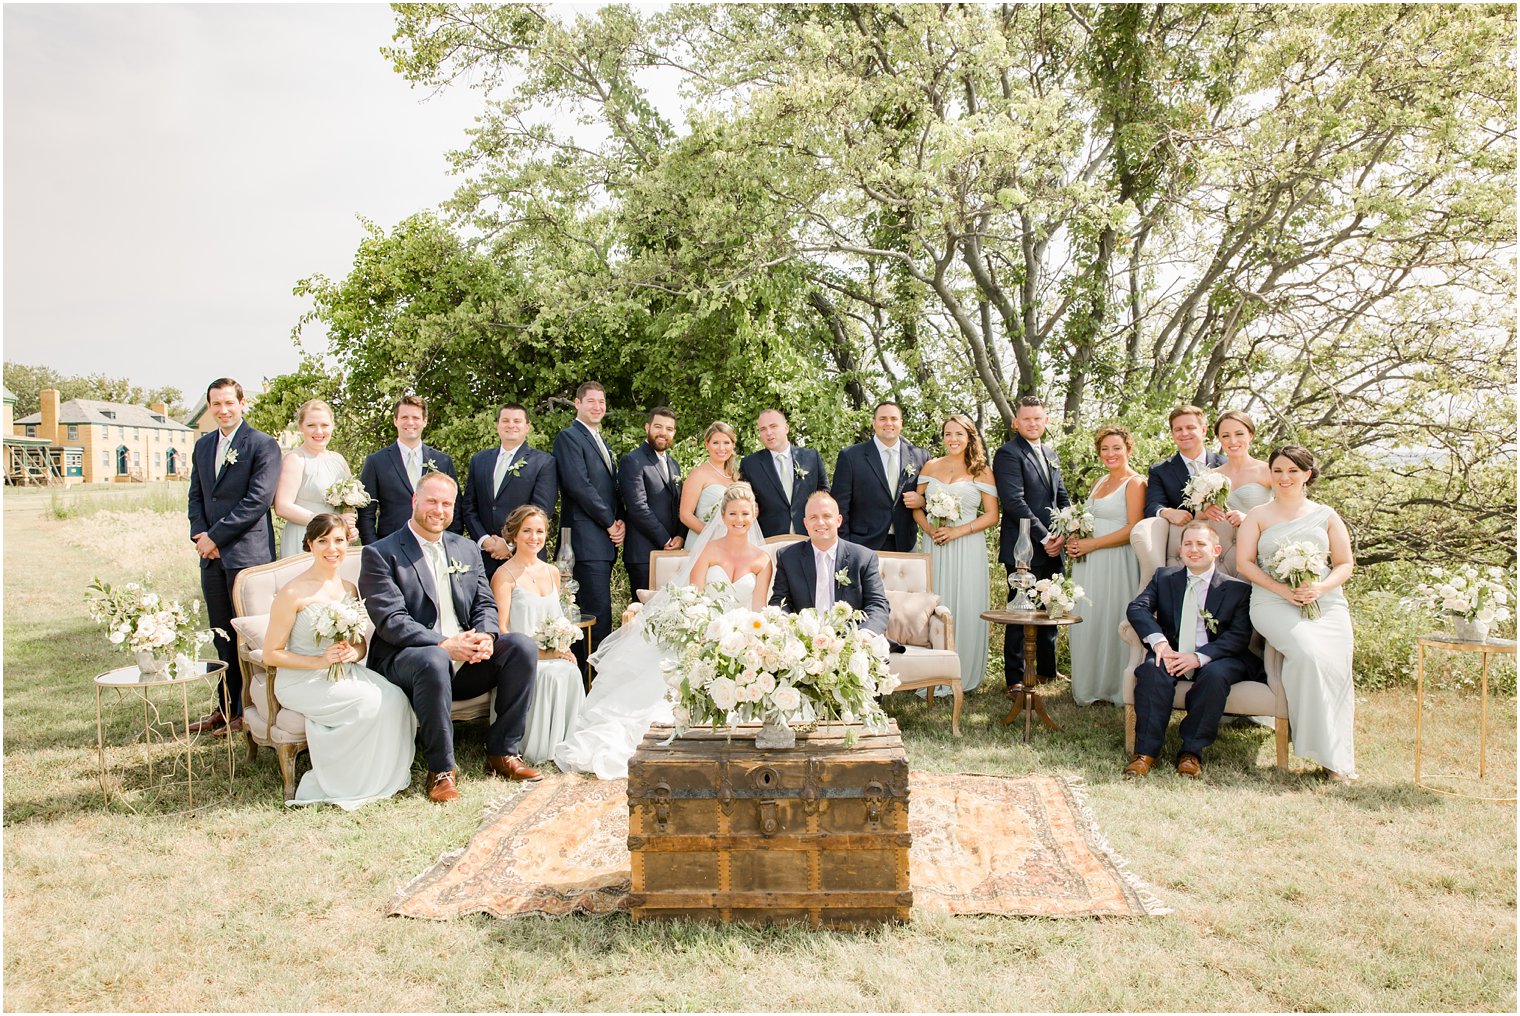 Bridal Party Photo with rentals by Dovetail Vintage Rentals